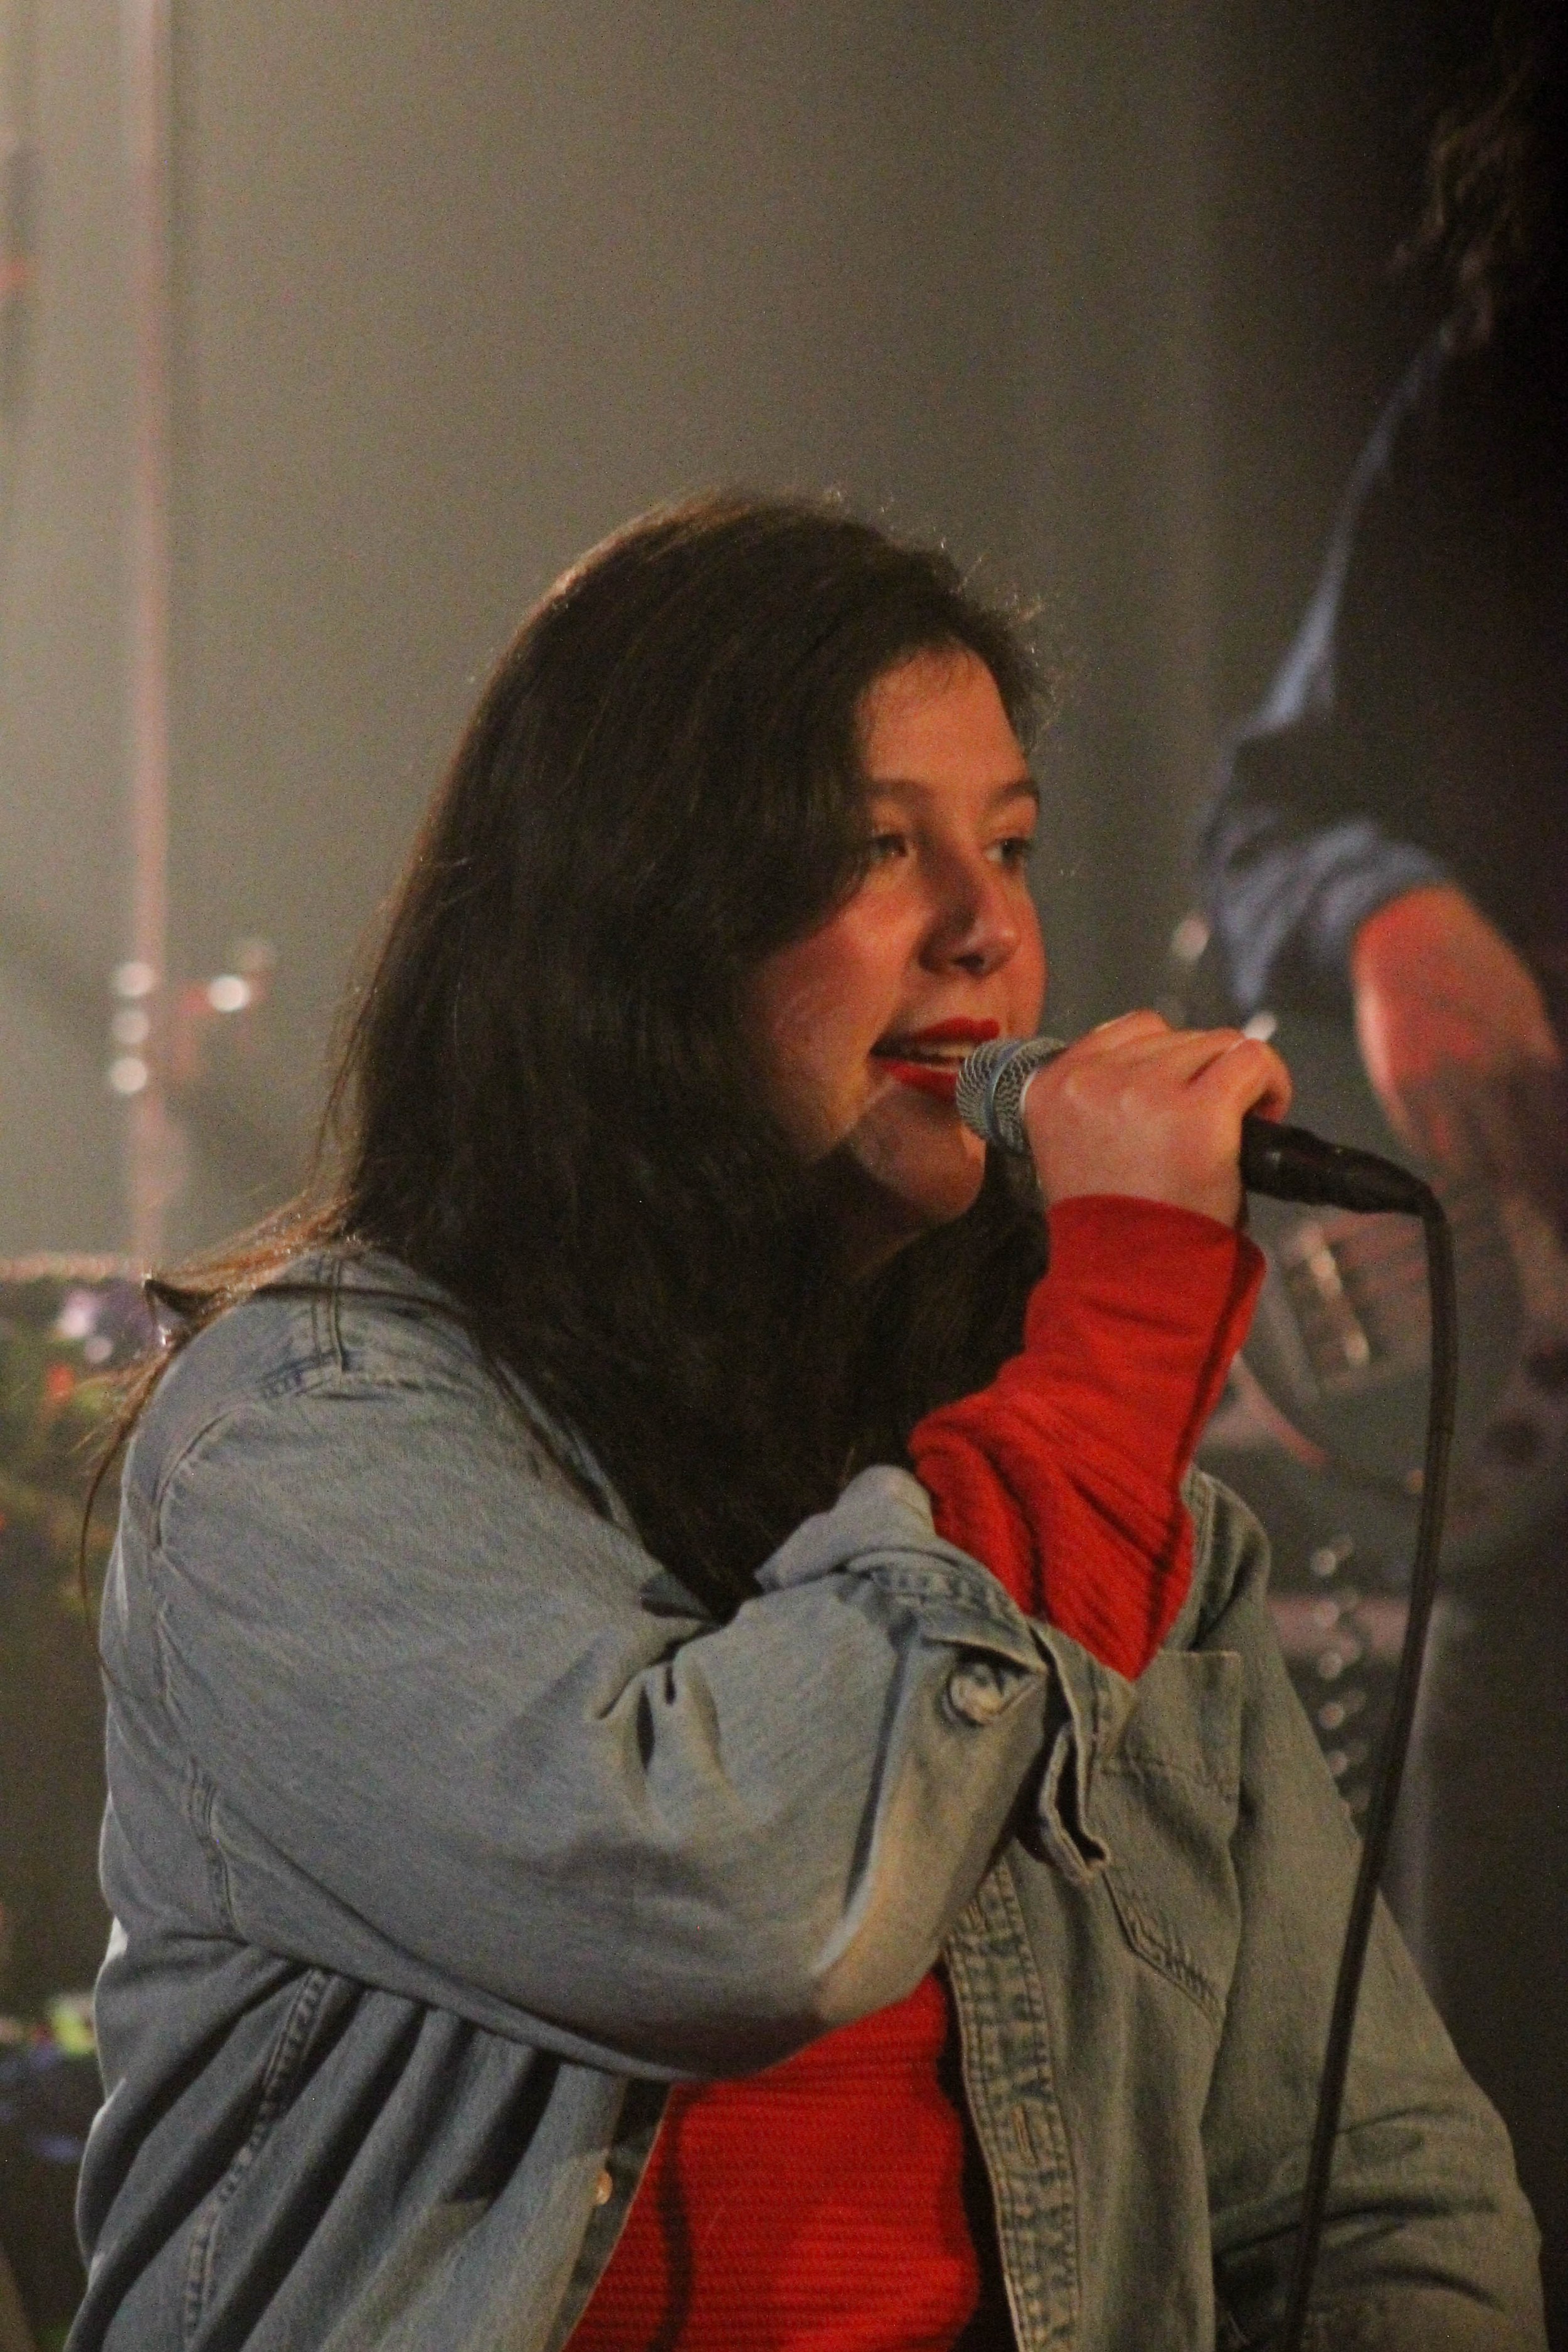 Portrait of Lucy Dacus from the waist up. She is wearing a red jumpsuit and a denim jacket. Her long, dark hair slightly covers one eye. She is holding a microphone in one hand. In the background one arm and an electric guitar are visible.